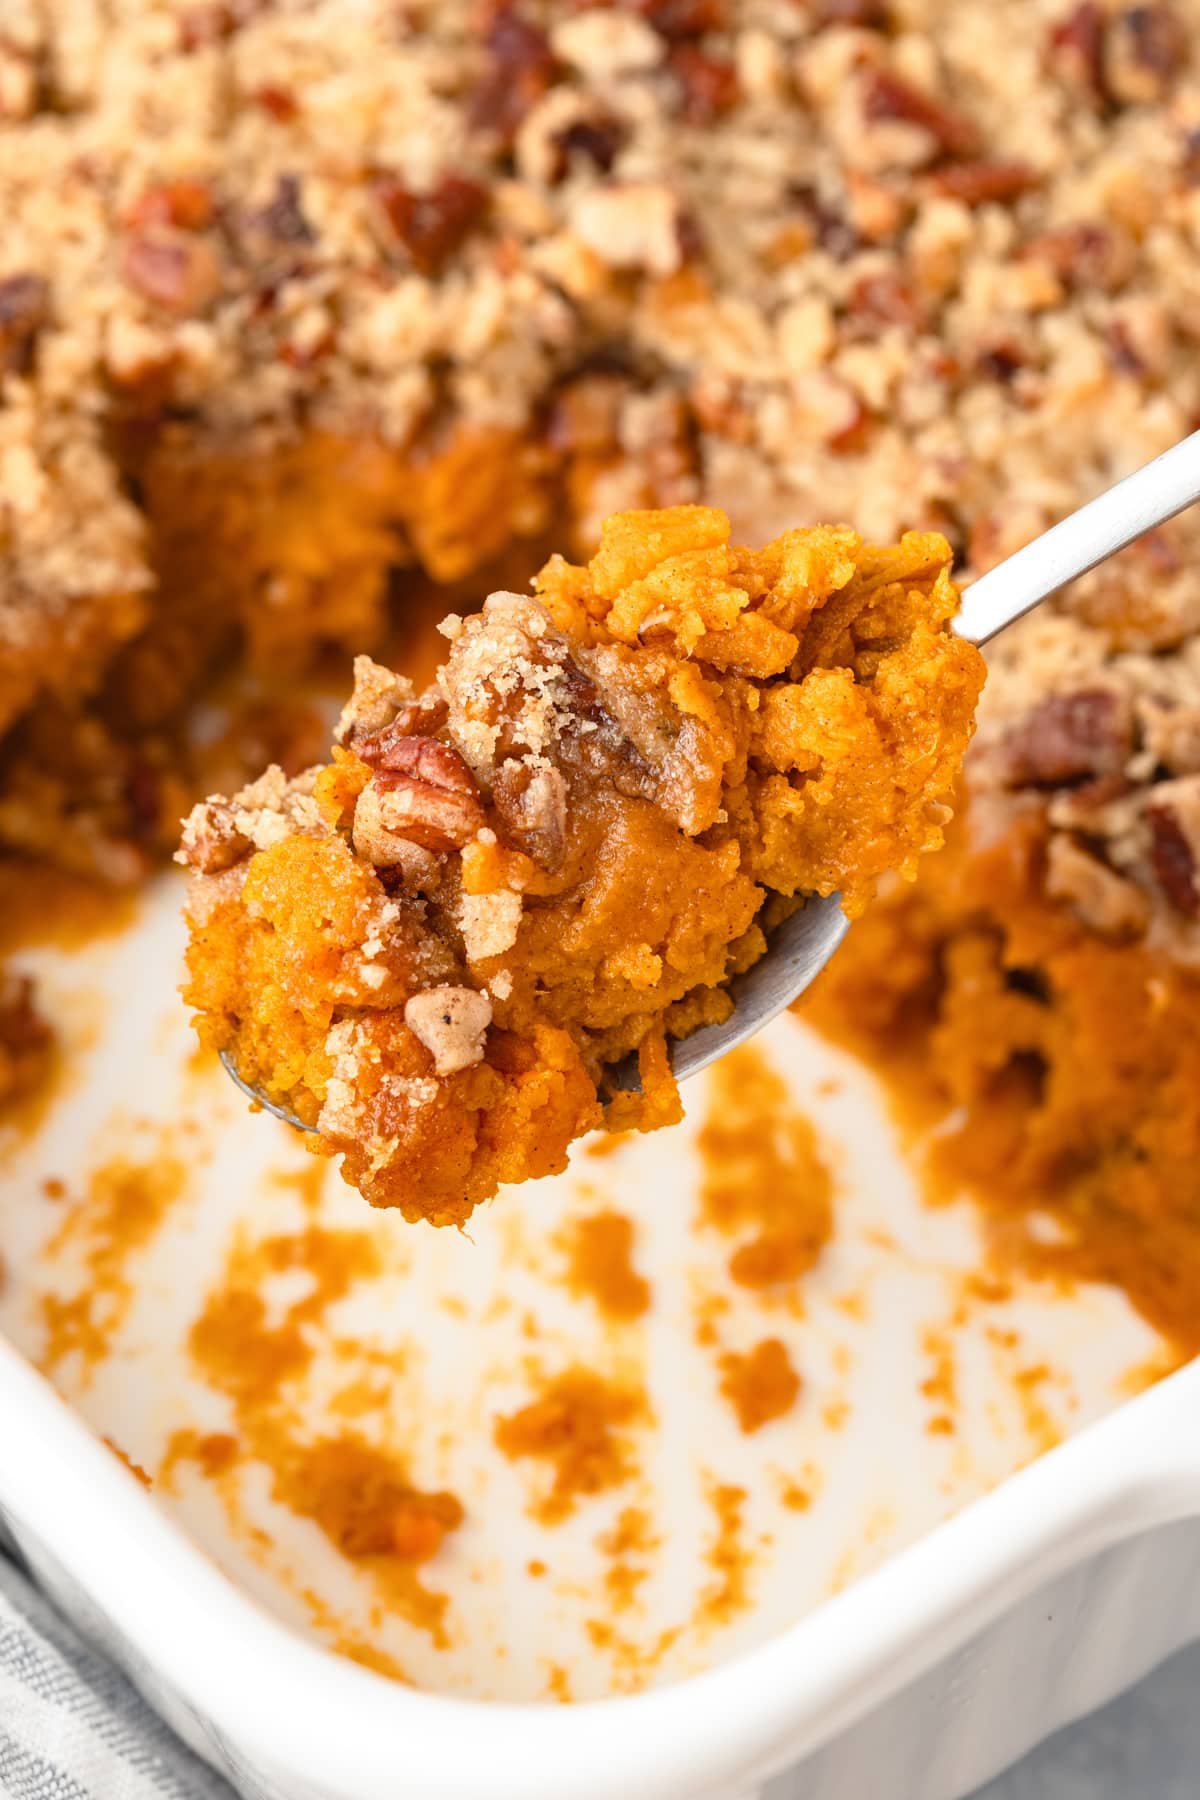 A spoon taking a portion of sweet potato casserole with pecans.